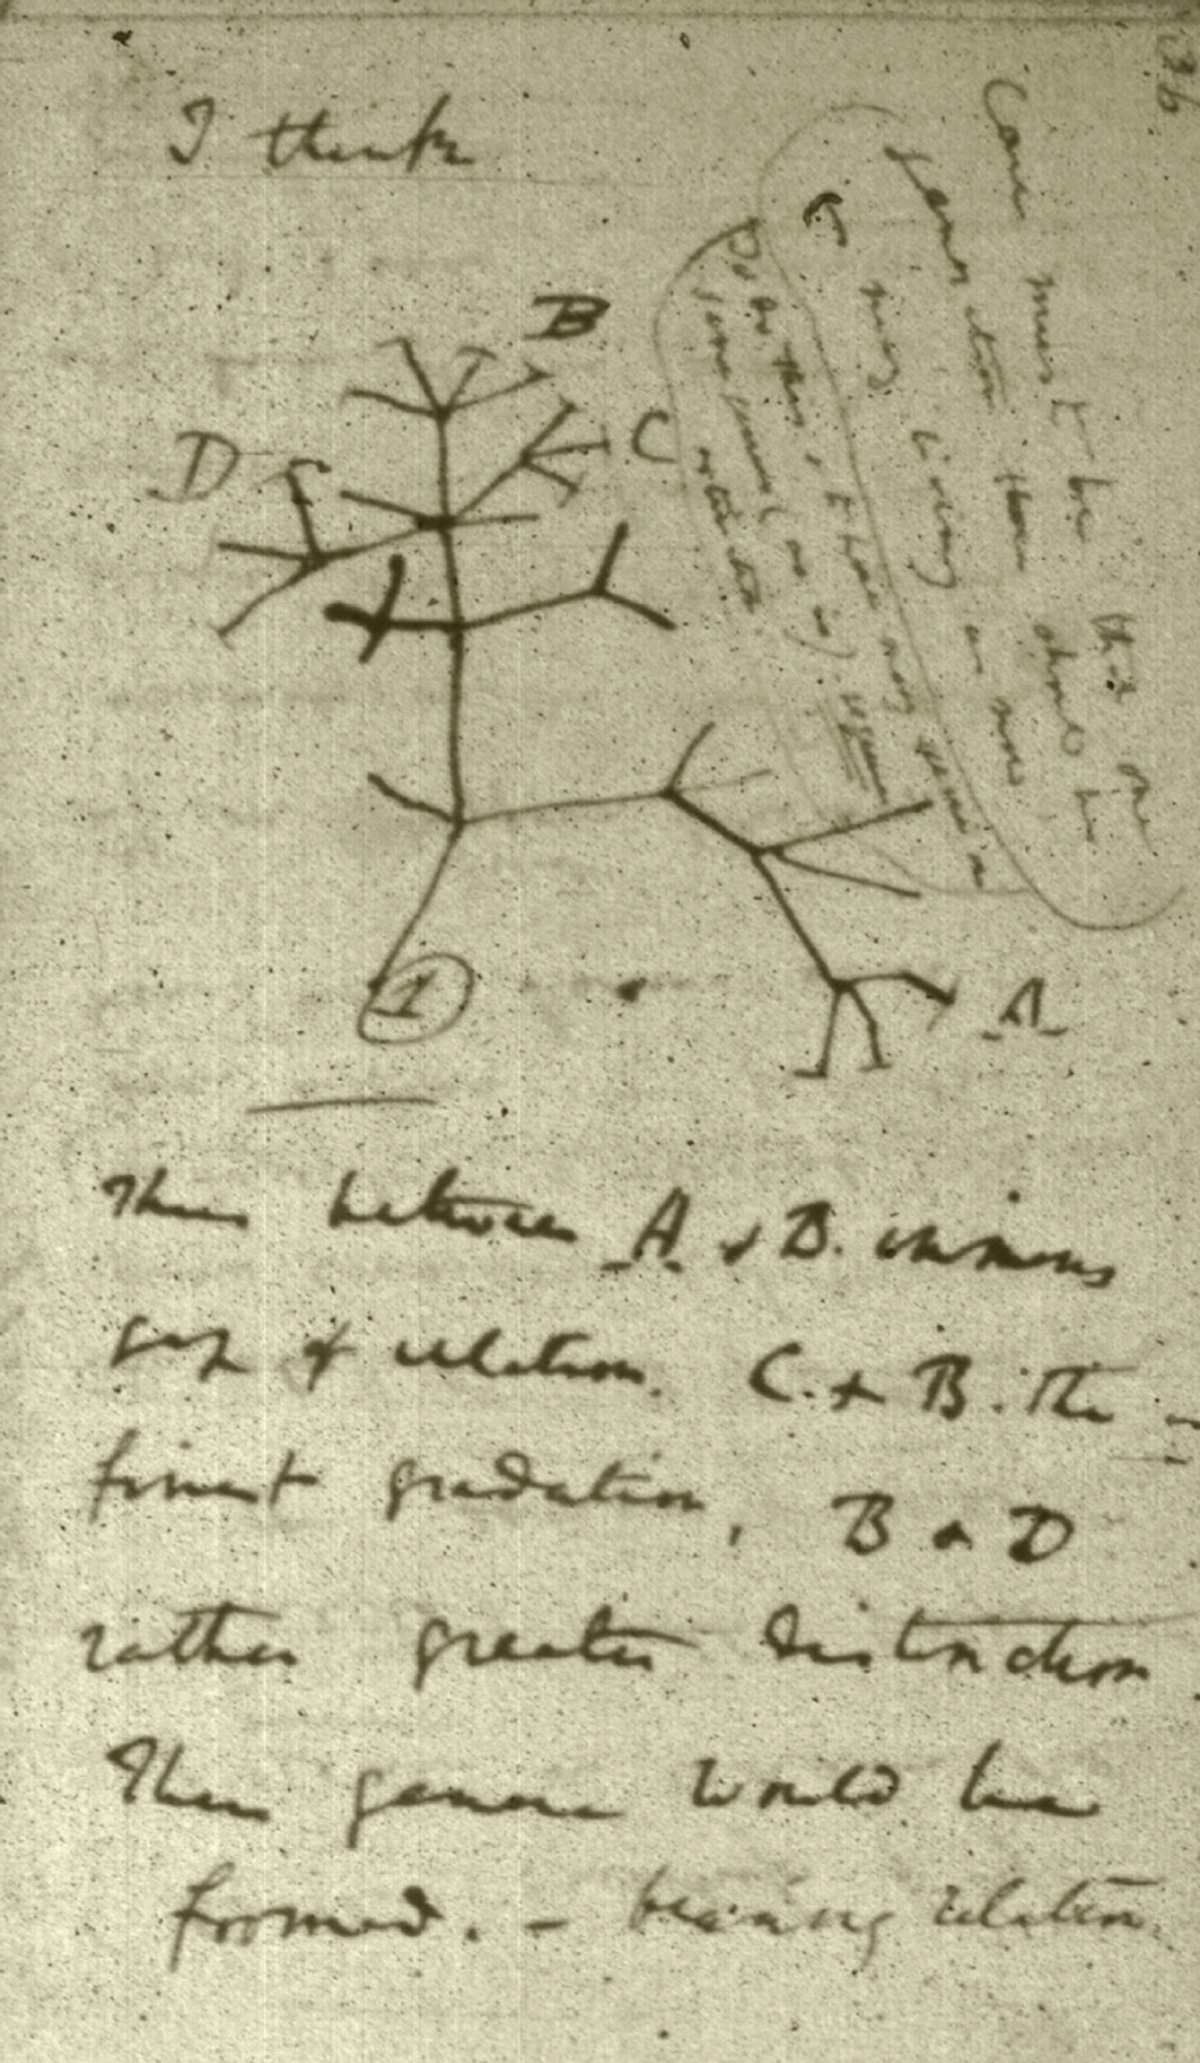 Darwin’s first sketch for a Tree of Life, which appeared in his private notebook (“Notebook B on the transmutation of species,” eighteen thirty-seven to eighteen thirty-eight). The accompanying text reads: “I think … Case must be that one generation then should be as many living as now. To do this and to have many species in same genus (as is) requires extinction. Thus between A & B immense gap of relation. C & B the finest gradation, B & D rather greater distinction. Thus genera would be formed.—bearing relation.”
